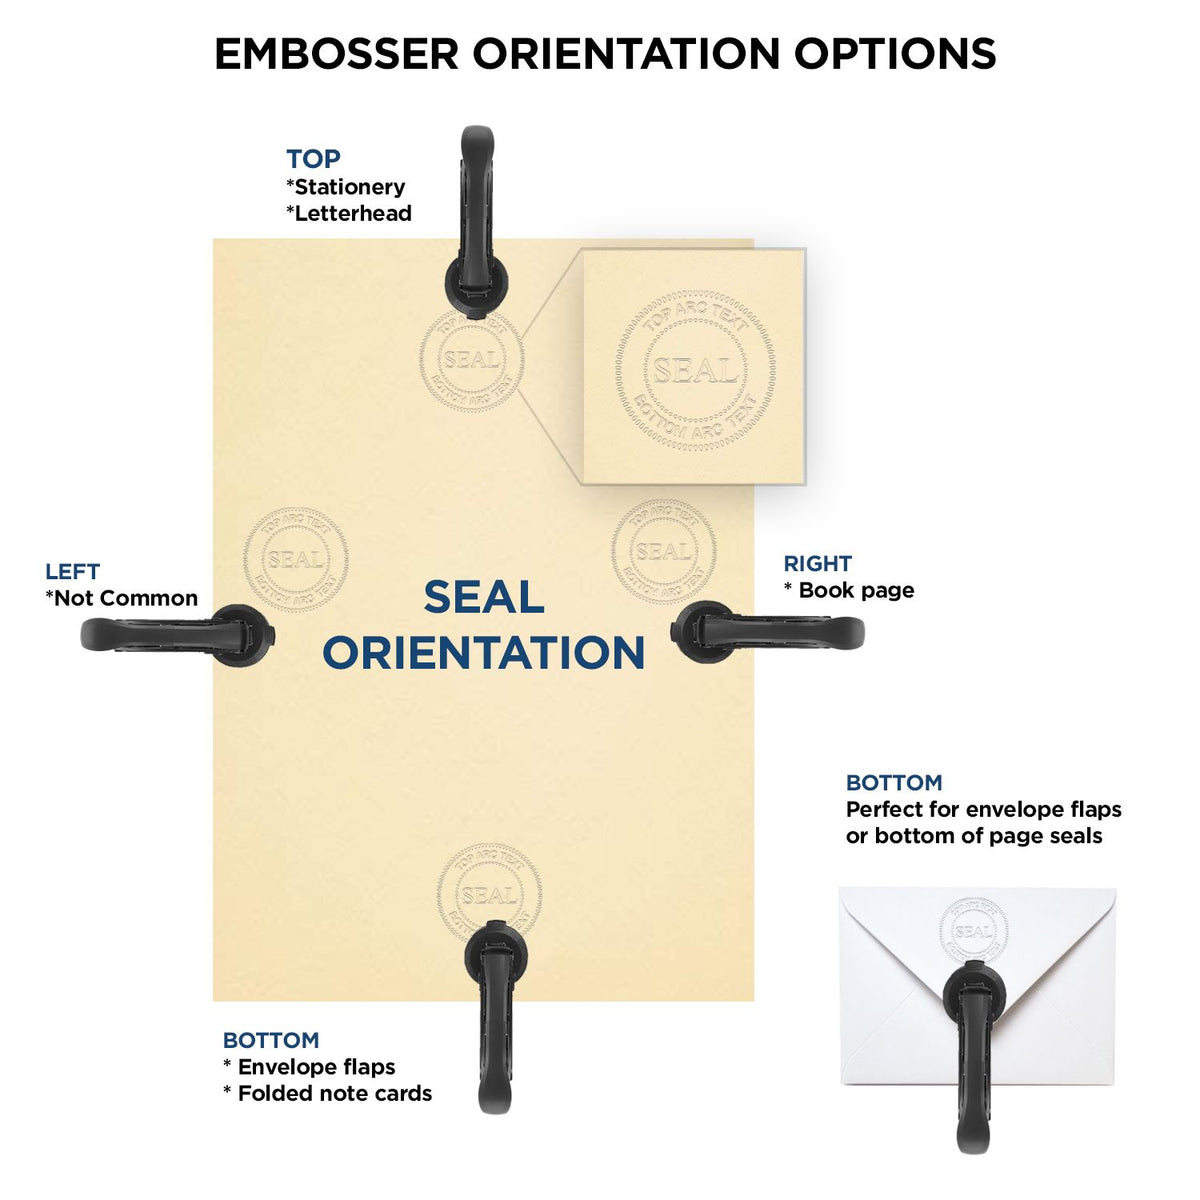 An infographic for the Heavy Duty Cast Iron Arkansas Geologist Seal Embosser showing embosser orientation, this is showing examples of a top, bottom, right and left insert.